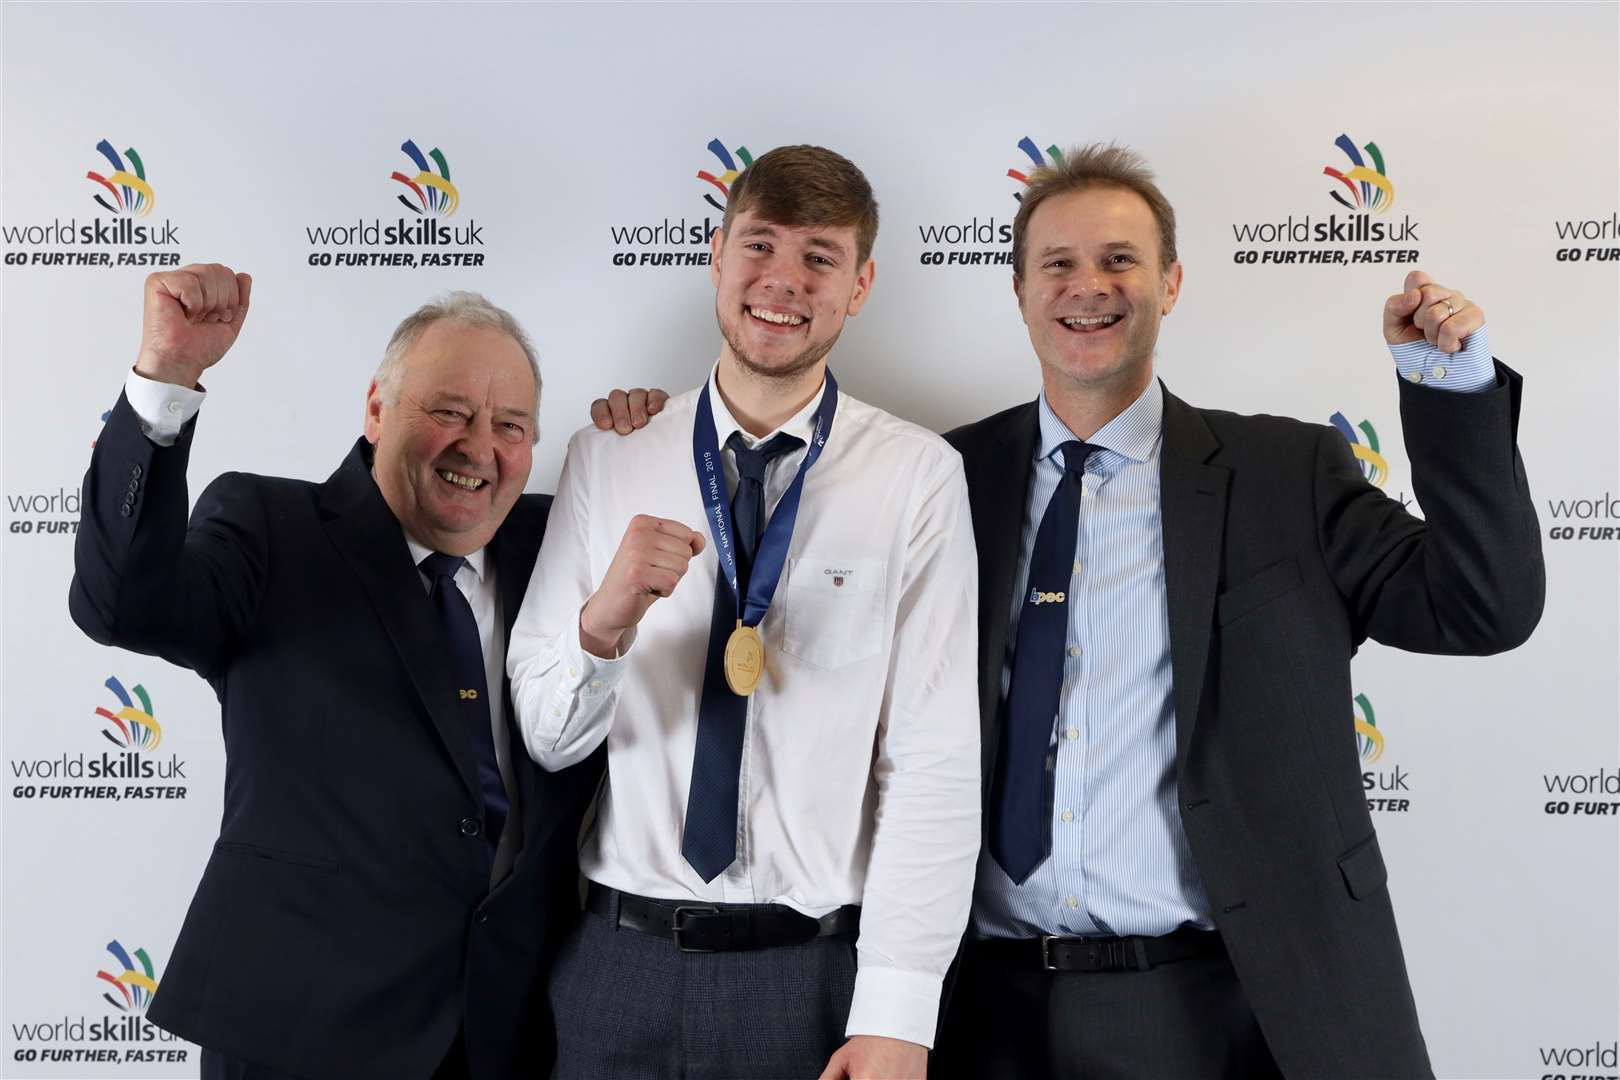 Connor Cruden with George Thomson and Neil Collishaw, the chairman and chief executive of BPEC, the vocational qualifications organisation.